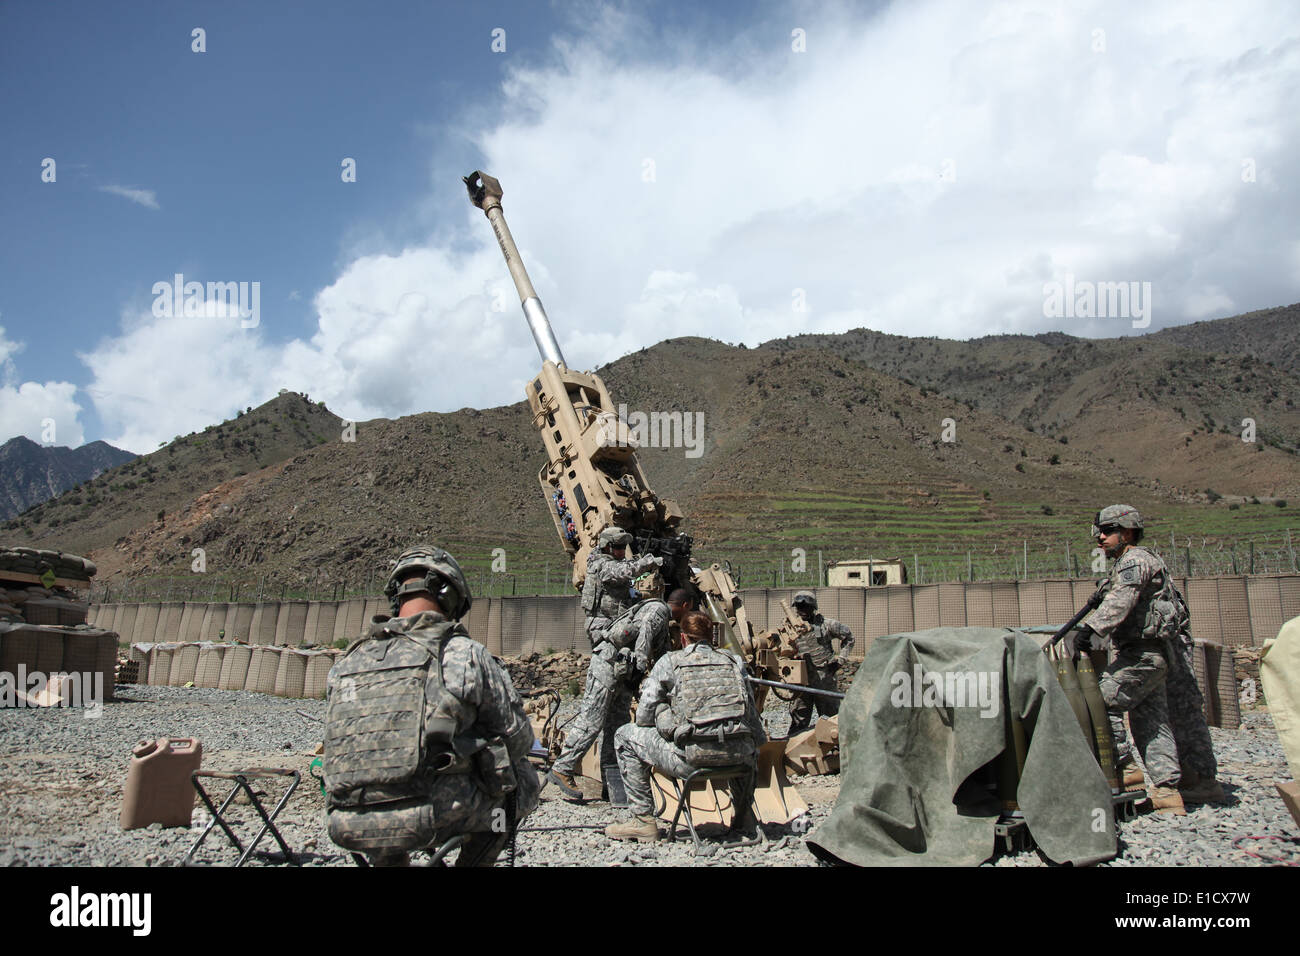 U.S. Soldiers prepare for their next fire mission at Forward Operating Base Bostick, Afghanistan, March 30, 2010. The Soldiers Stock Photo